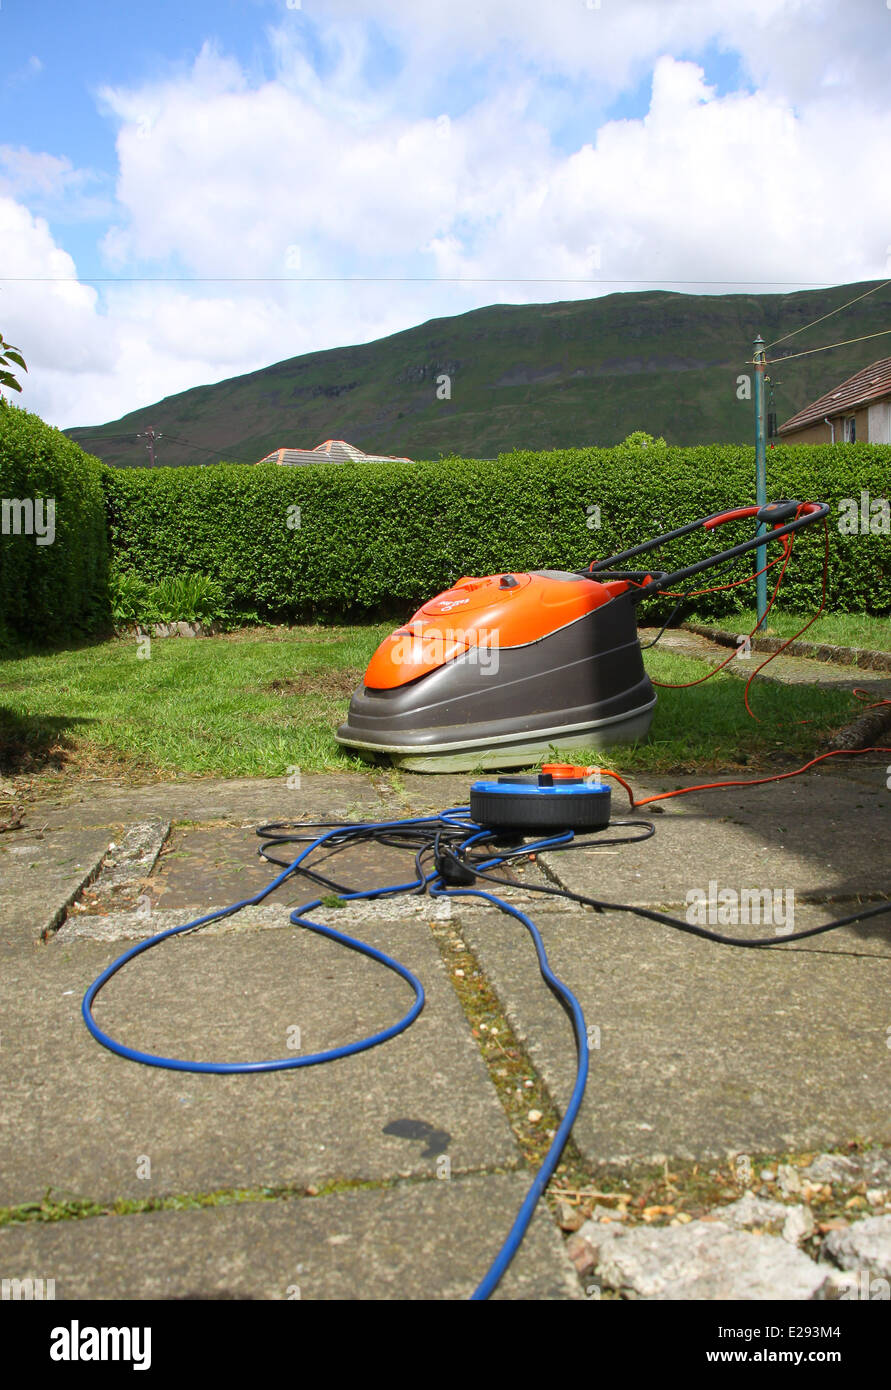 Mowing grass in garden with Flymo hover lawn mower Stock Photo